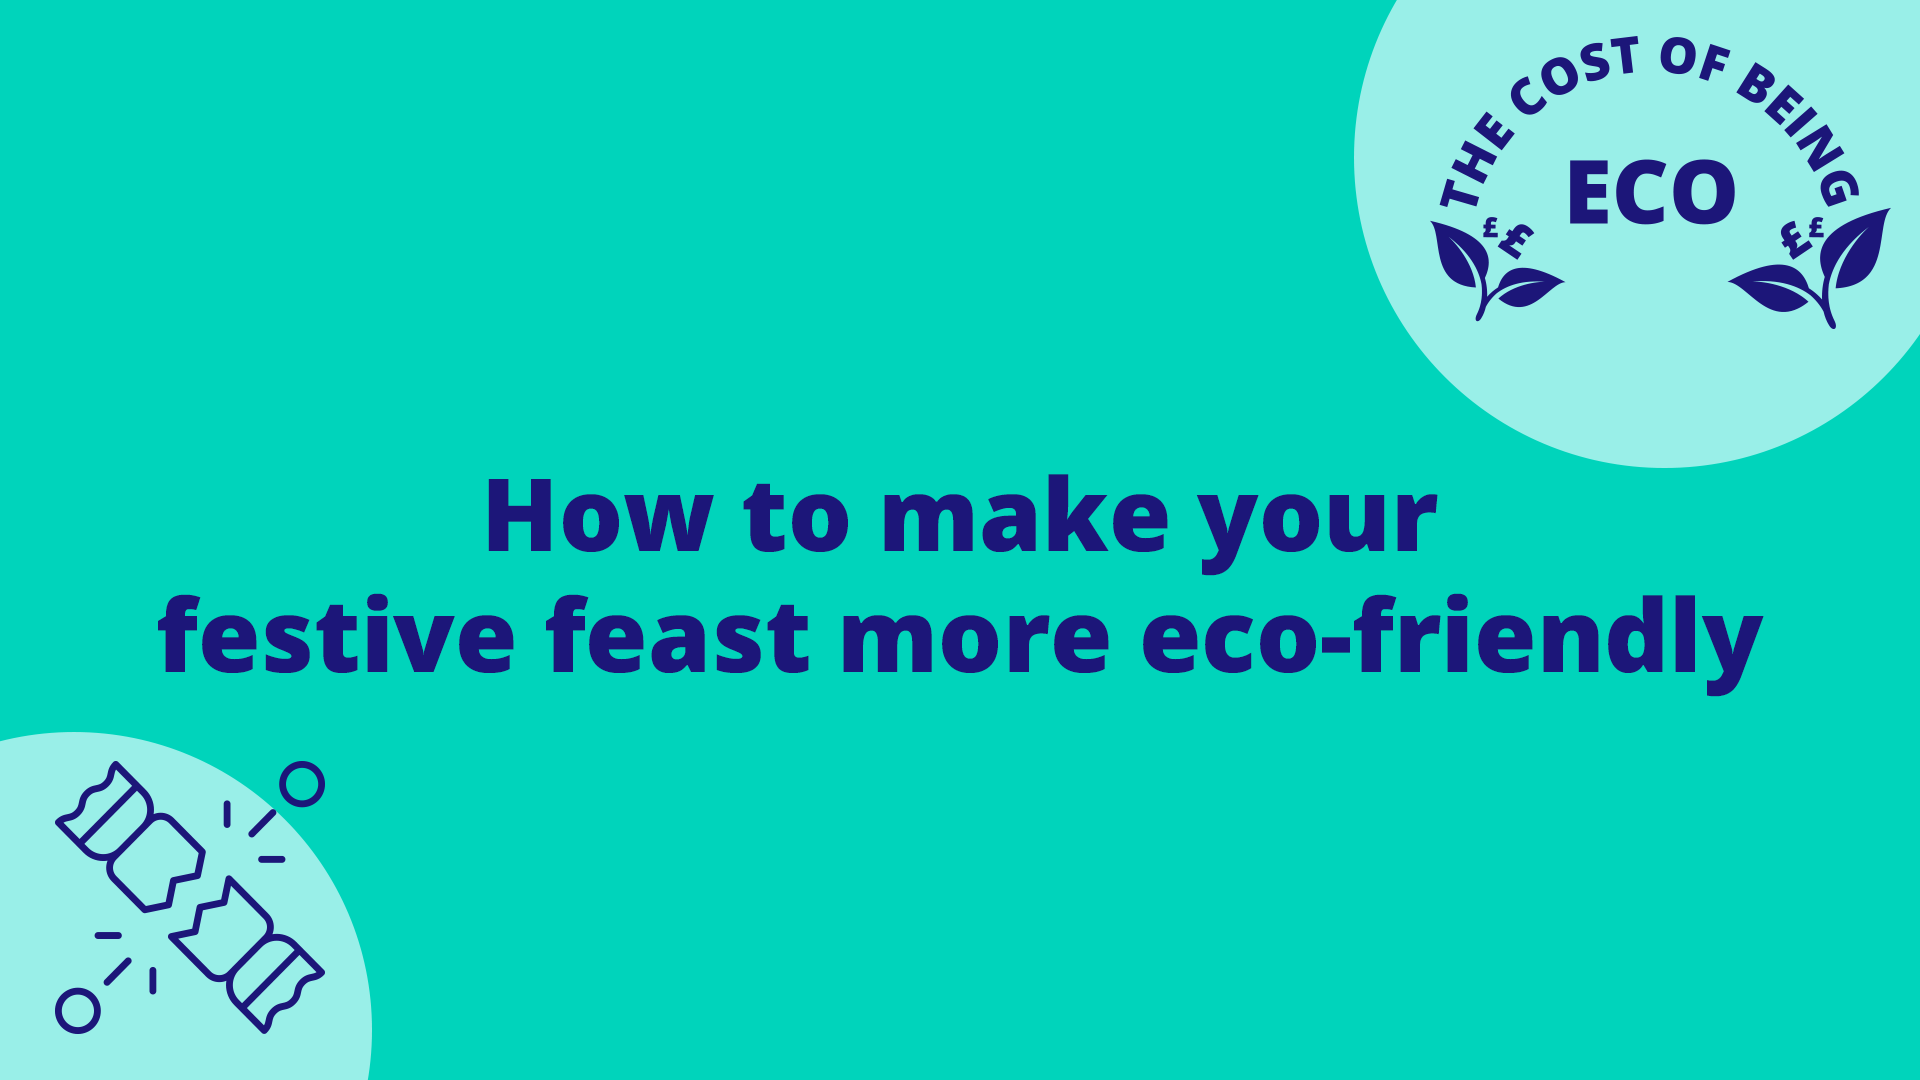 Featured image for  The Cost of Being Eco: How to make your festive feast more eco-friendly